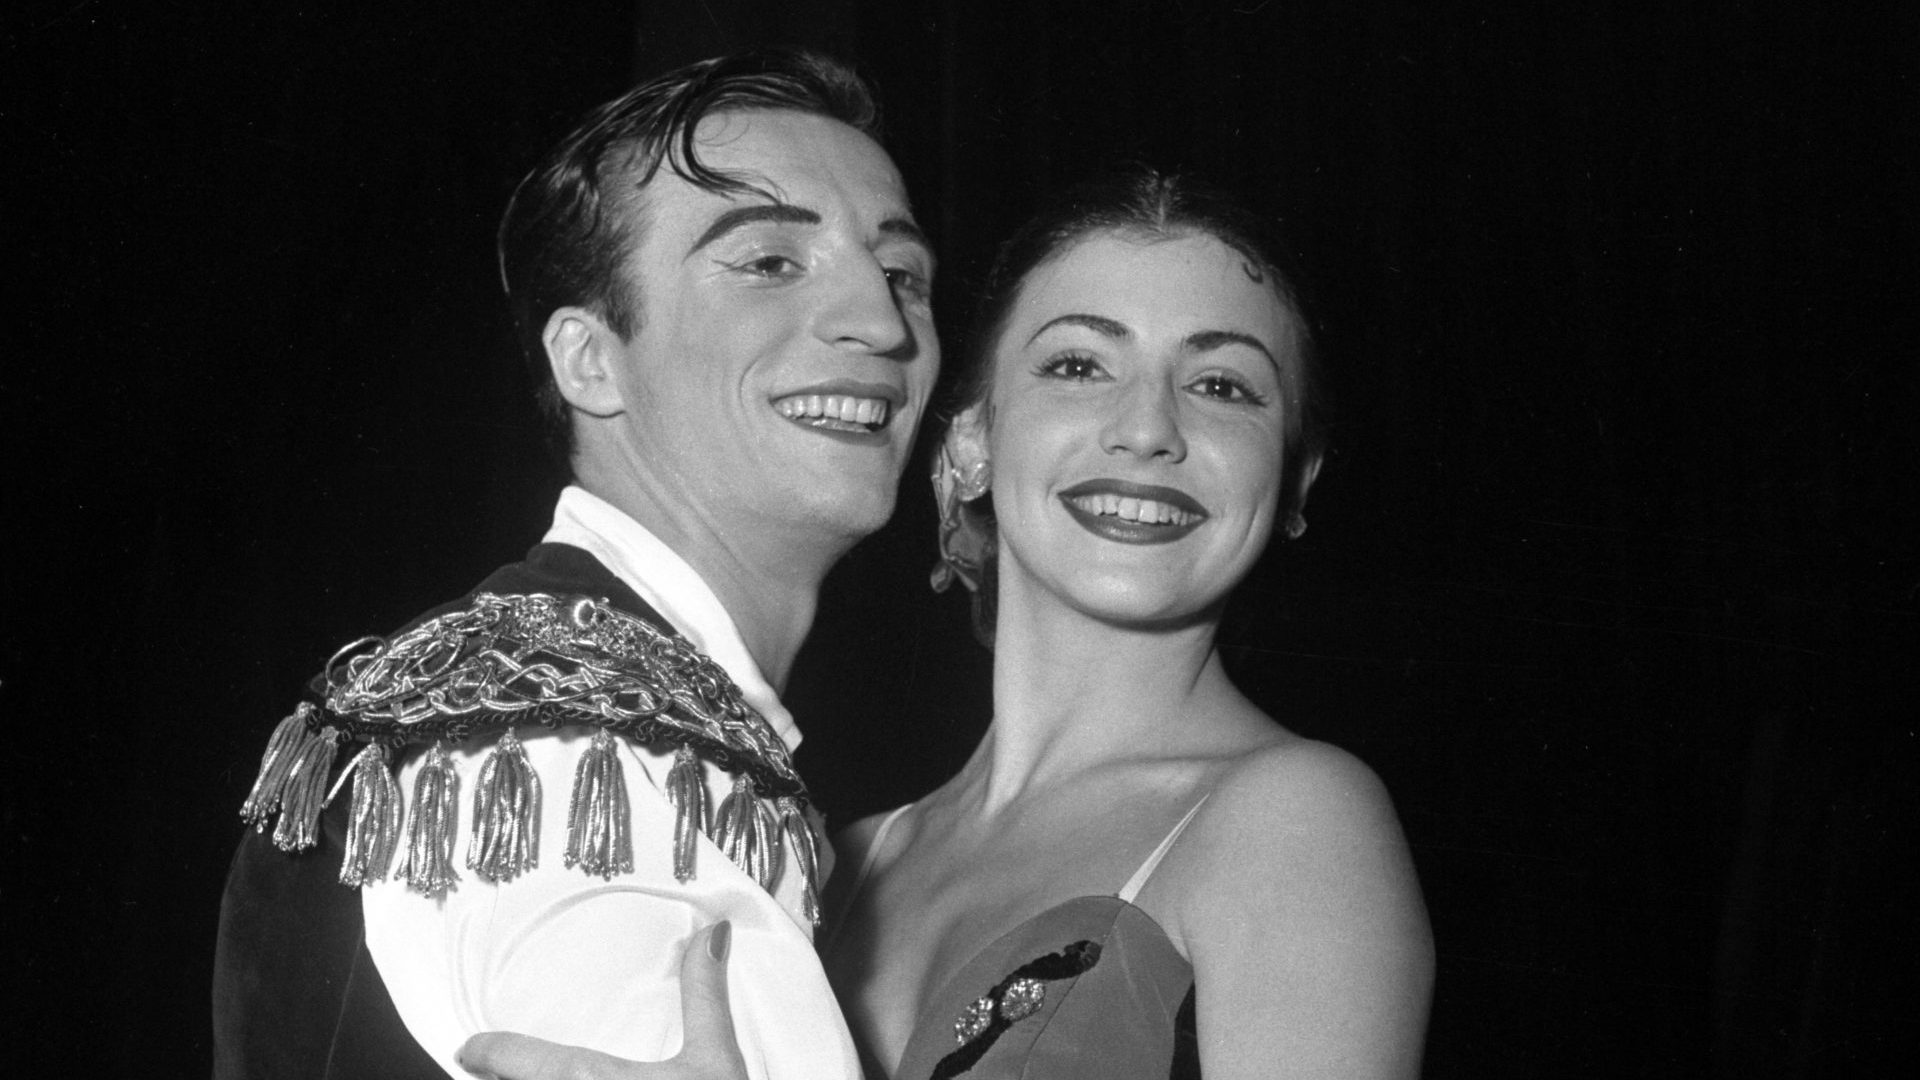 Hungarian ballet dancers Nora Kovach and Istvan Rabovsky in Paris, October 1953, five months after the couple defected to the west from the Soviet bloc. Photo: Keystone-France/Gamma-Rapho/Getty